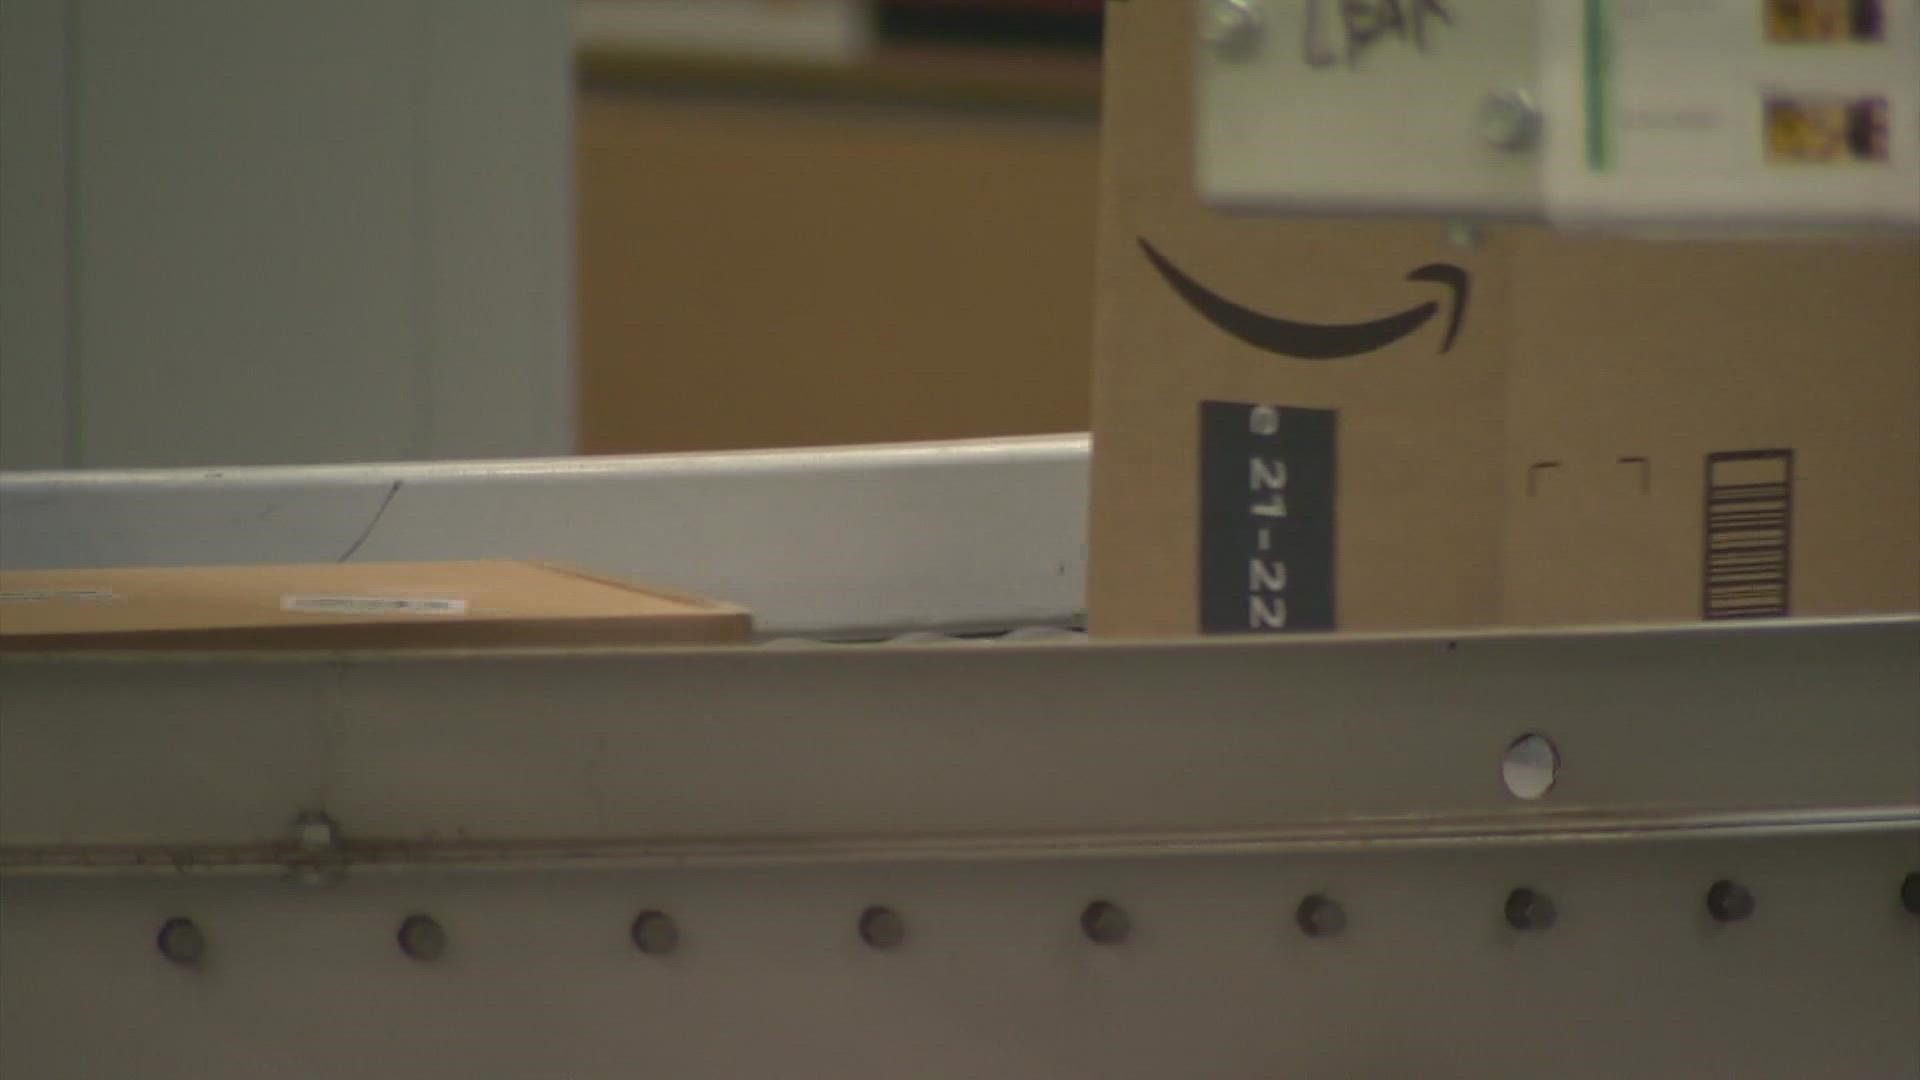 Early results show Amazon workers in Alabama rejecting a union bid in a tight race.